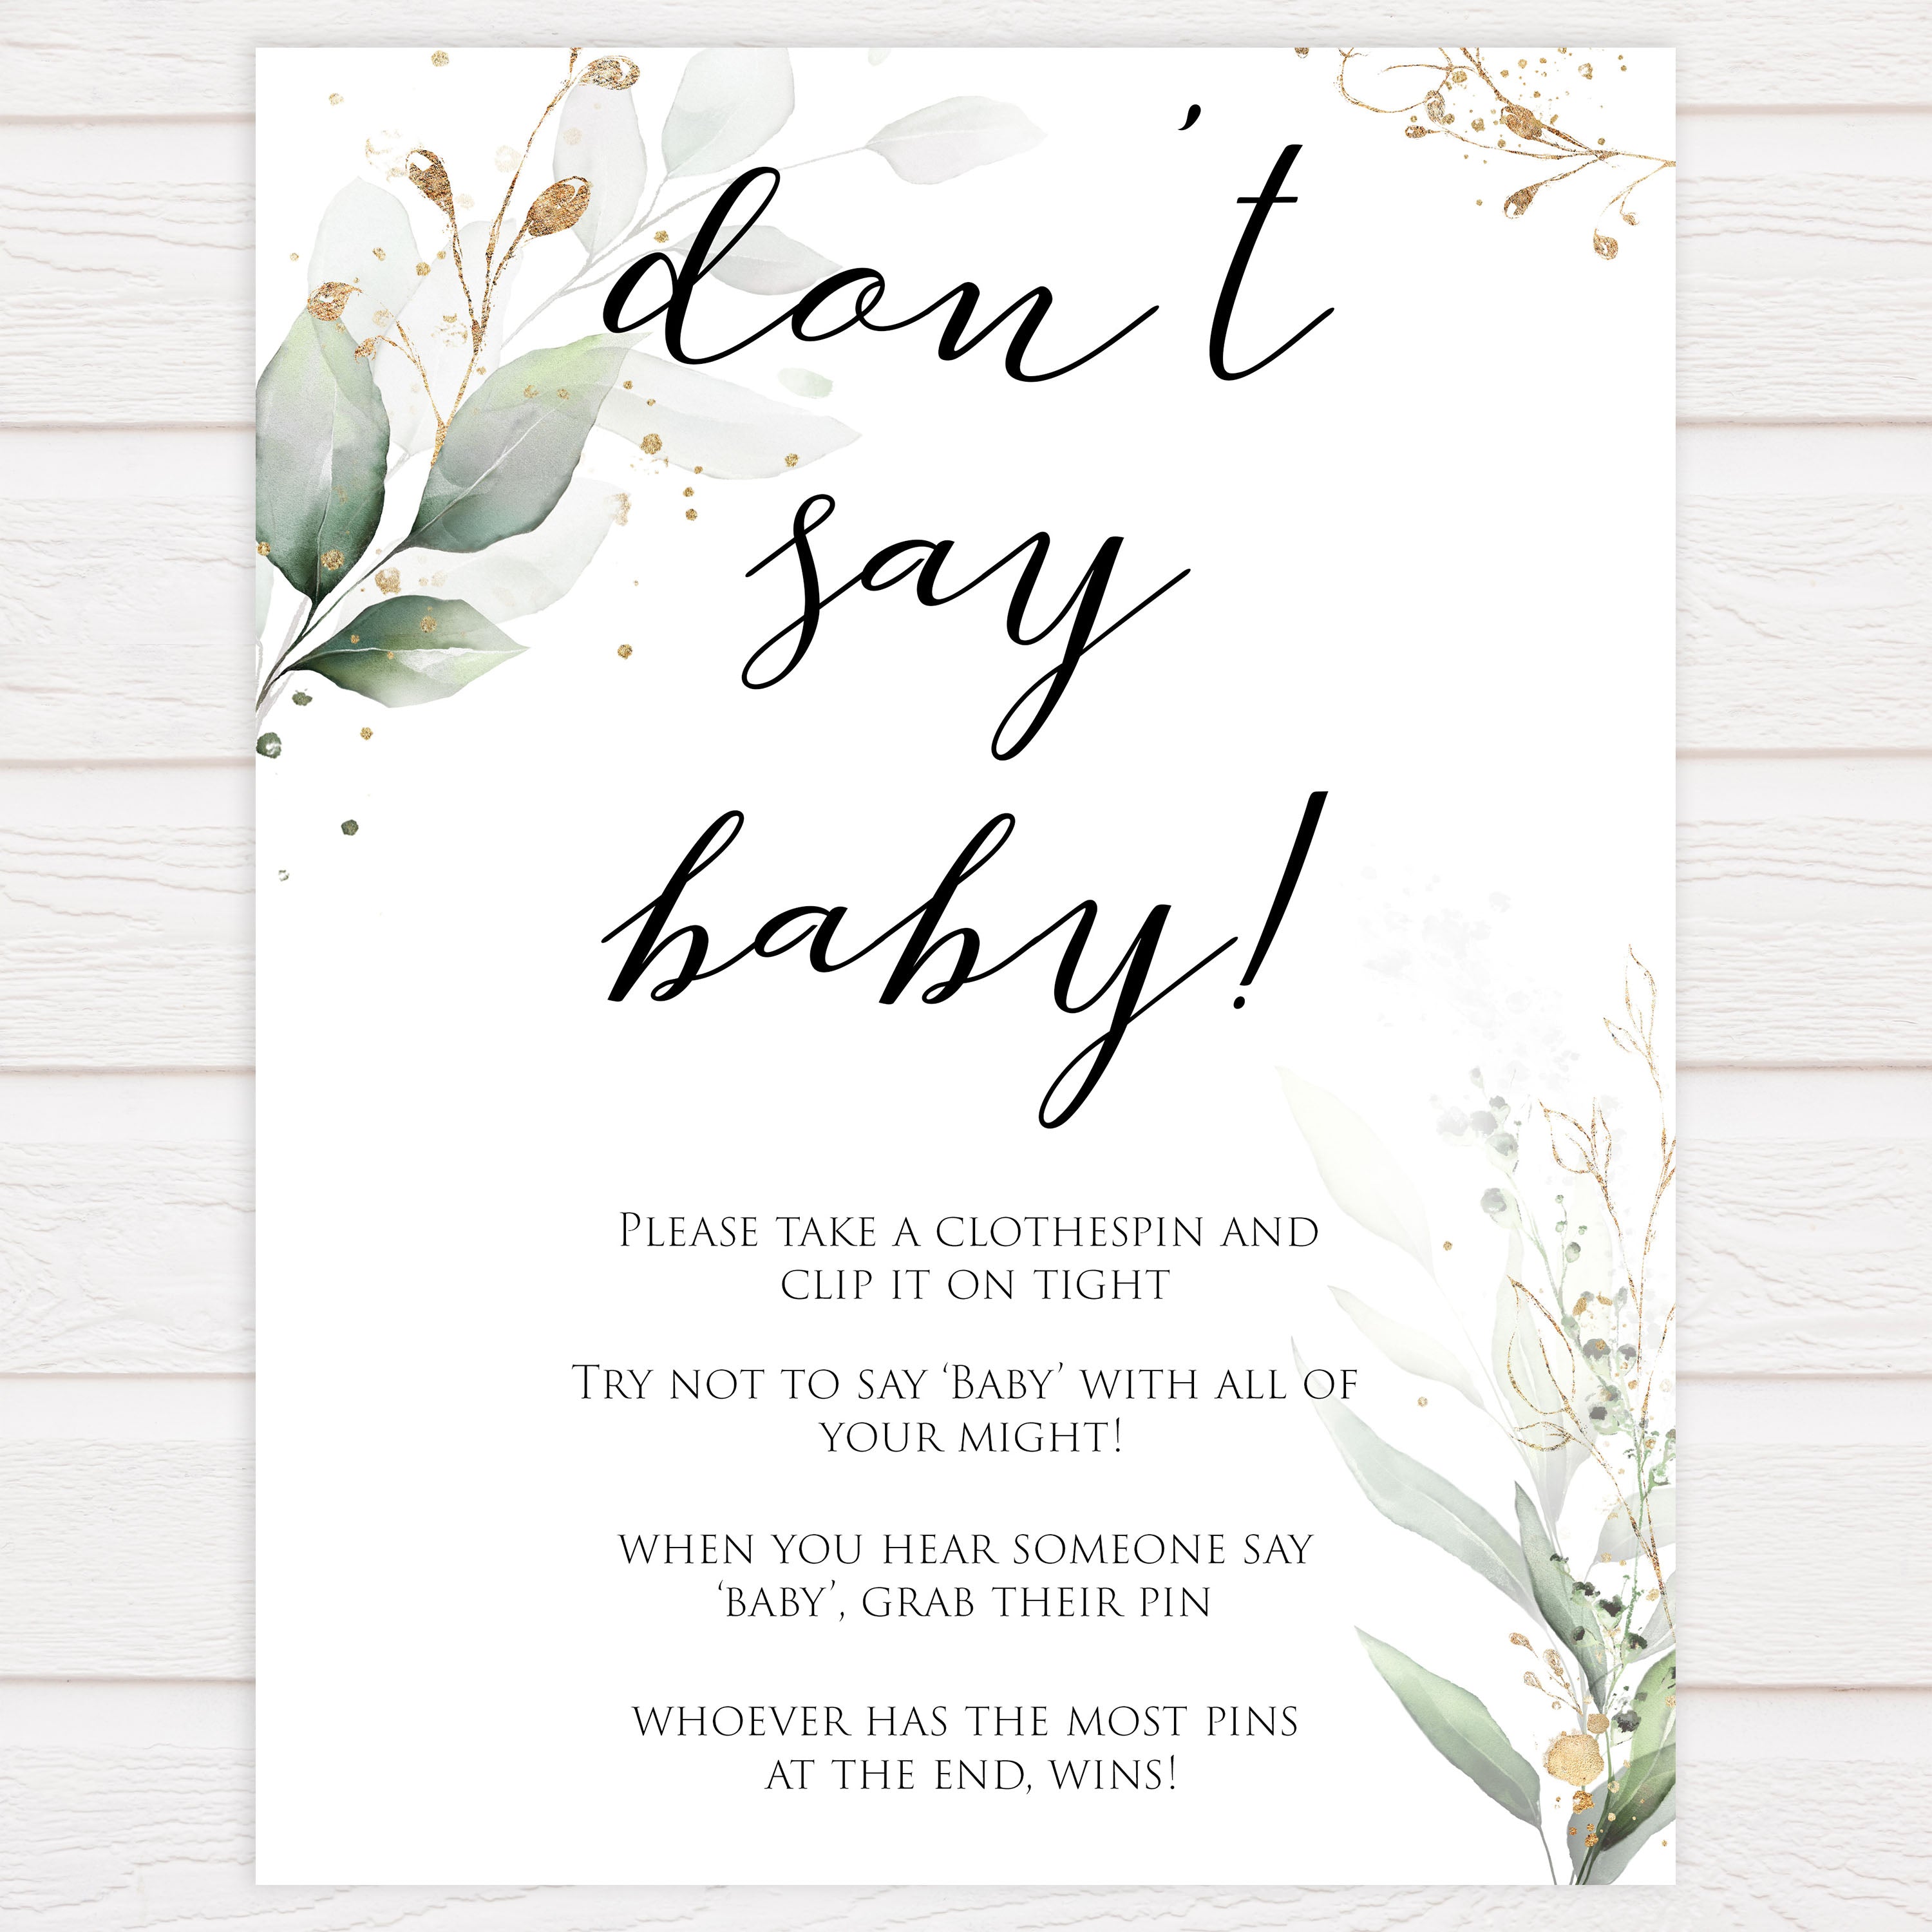 Gold green leaf baby games, dont say baby, printable baby games, fun baby games, top baby games to play, gold leaf baby shower, greenery baby shower ideas